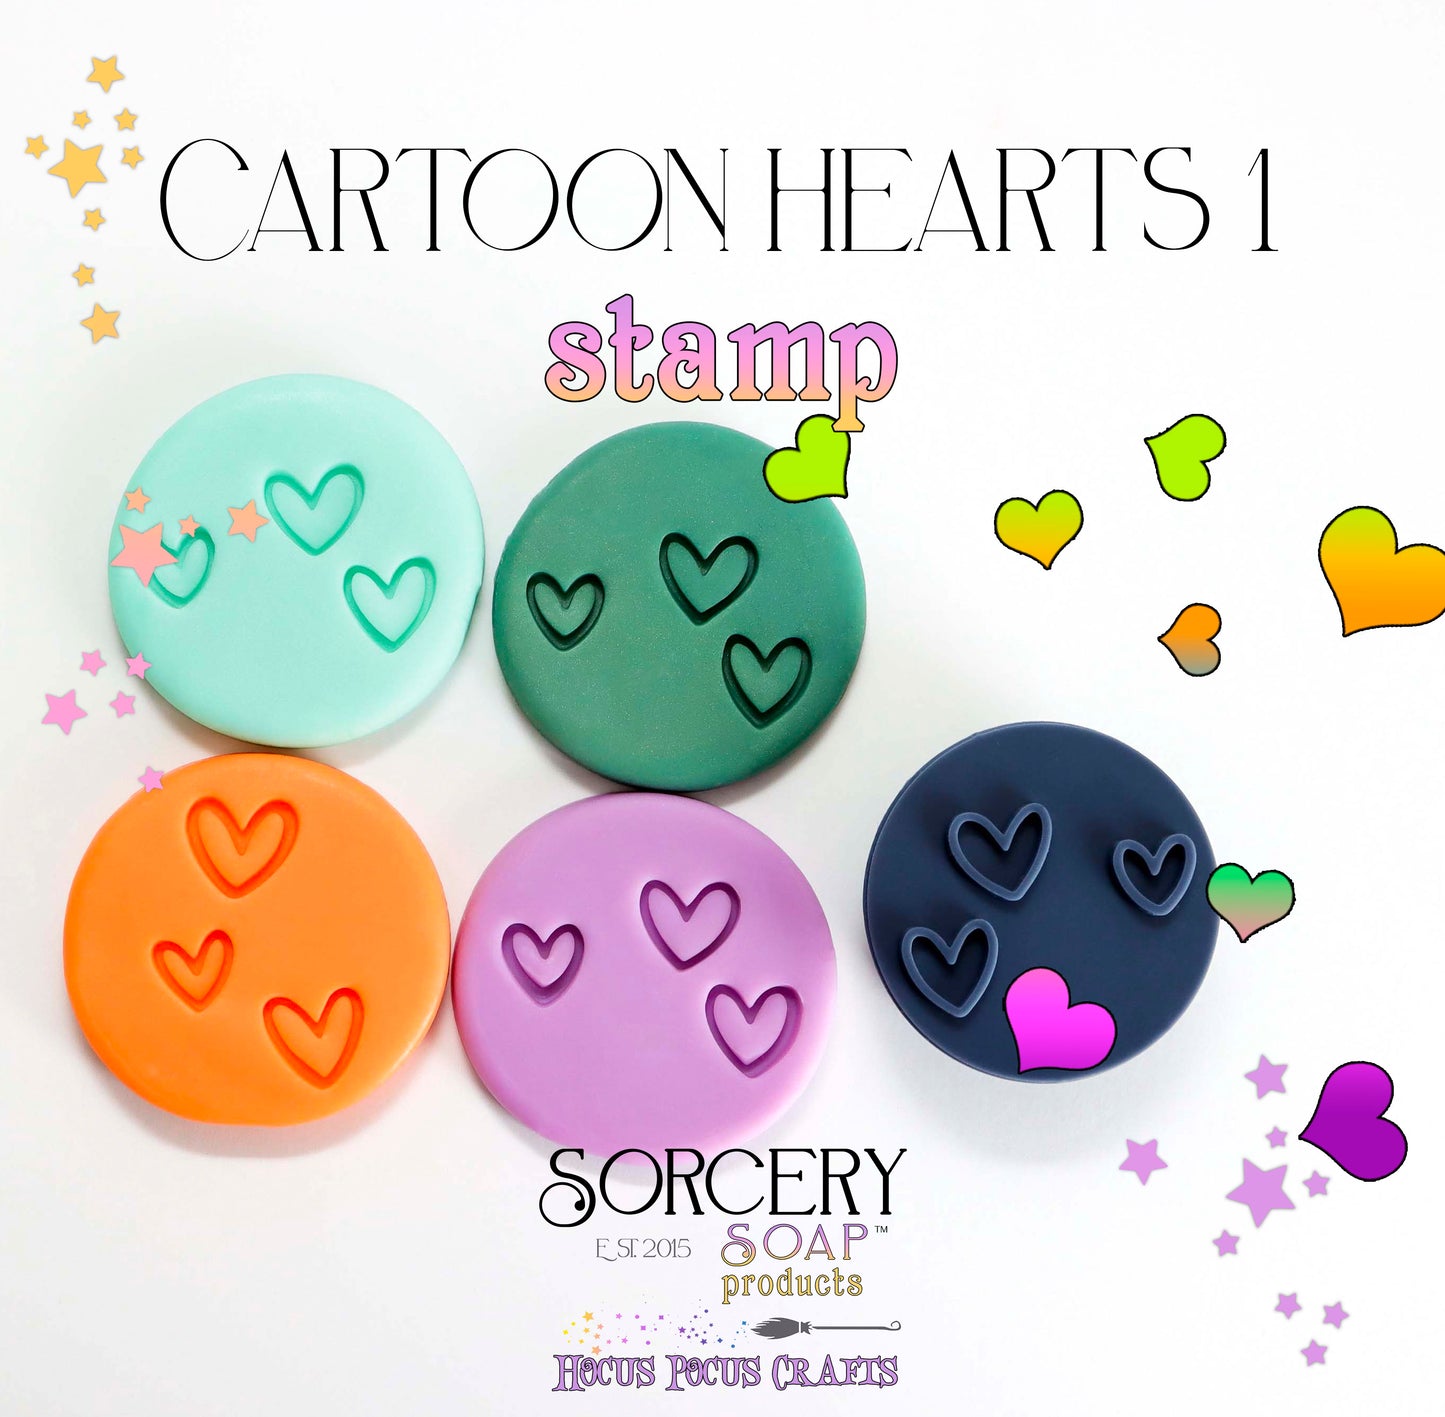 Party - Cartoon Hearts 1 Stamp